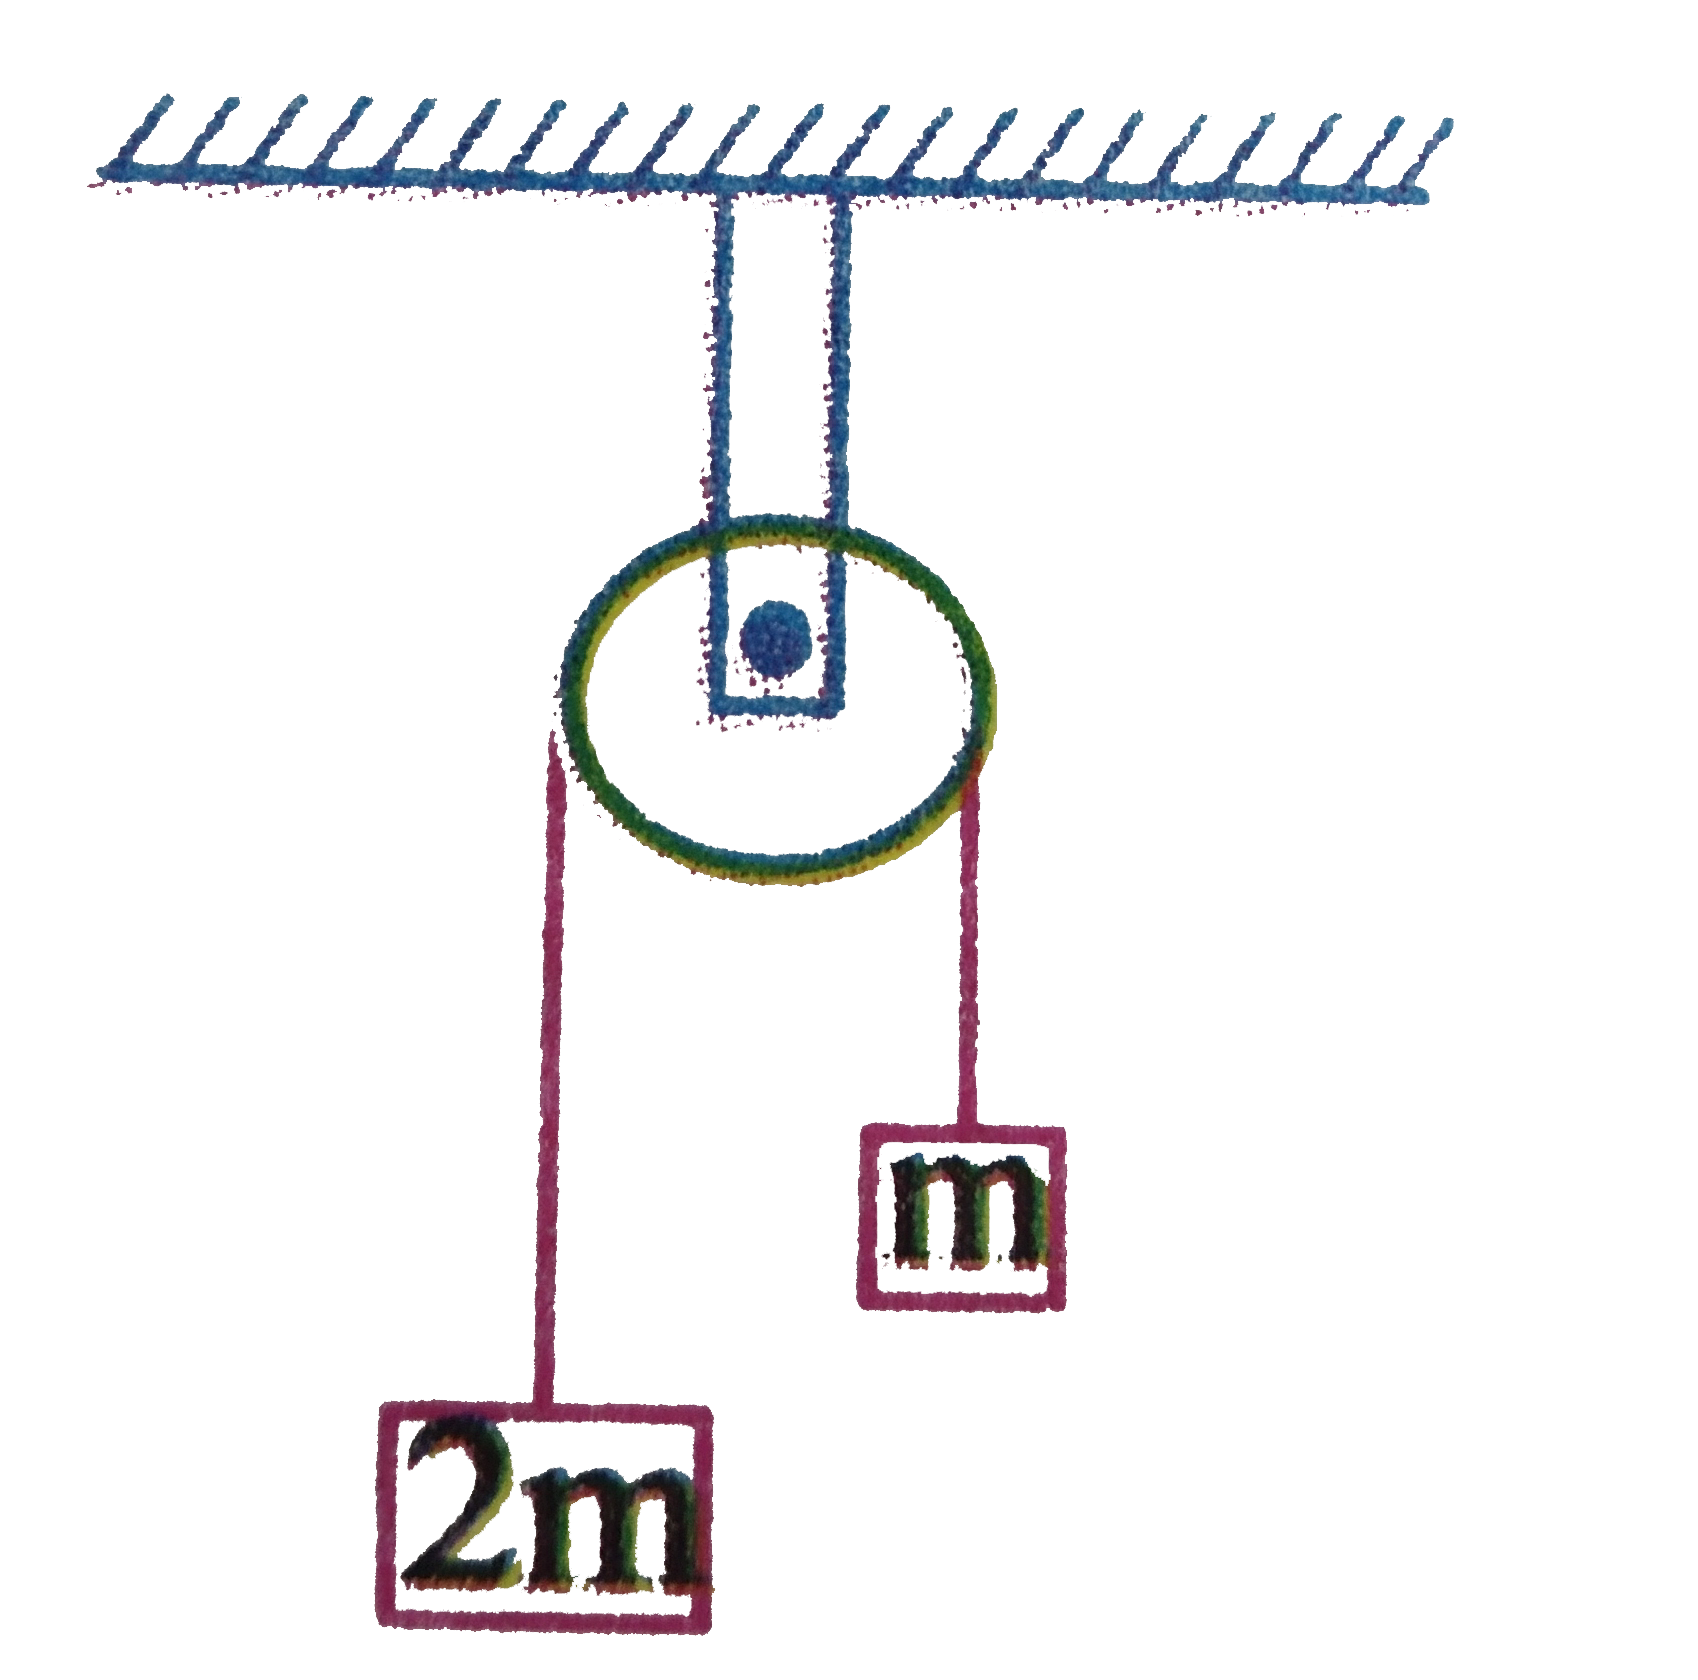 Two blocks of masses m and 2m are connected through a wire fo breakig stress S passing over a  frictionless pulley. The maximum radius  of the wire  to be used so that the wire may not break is